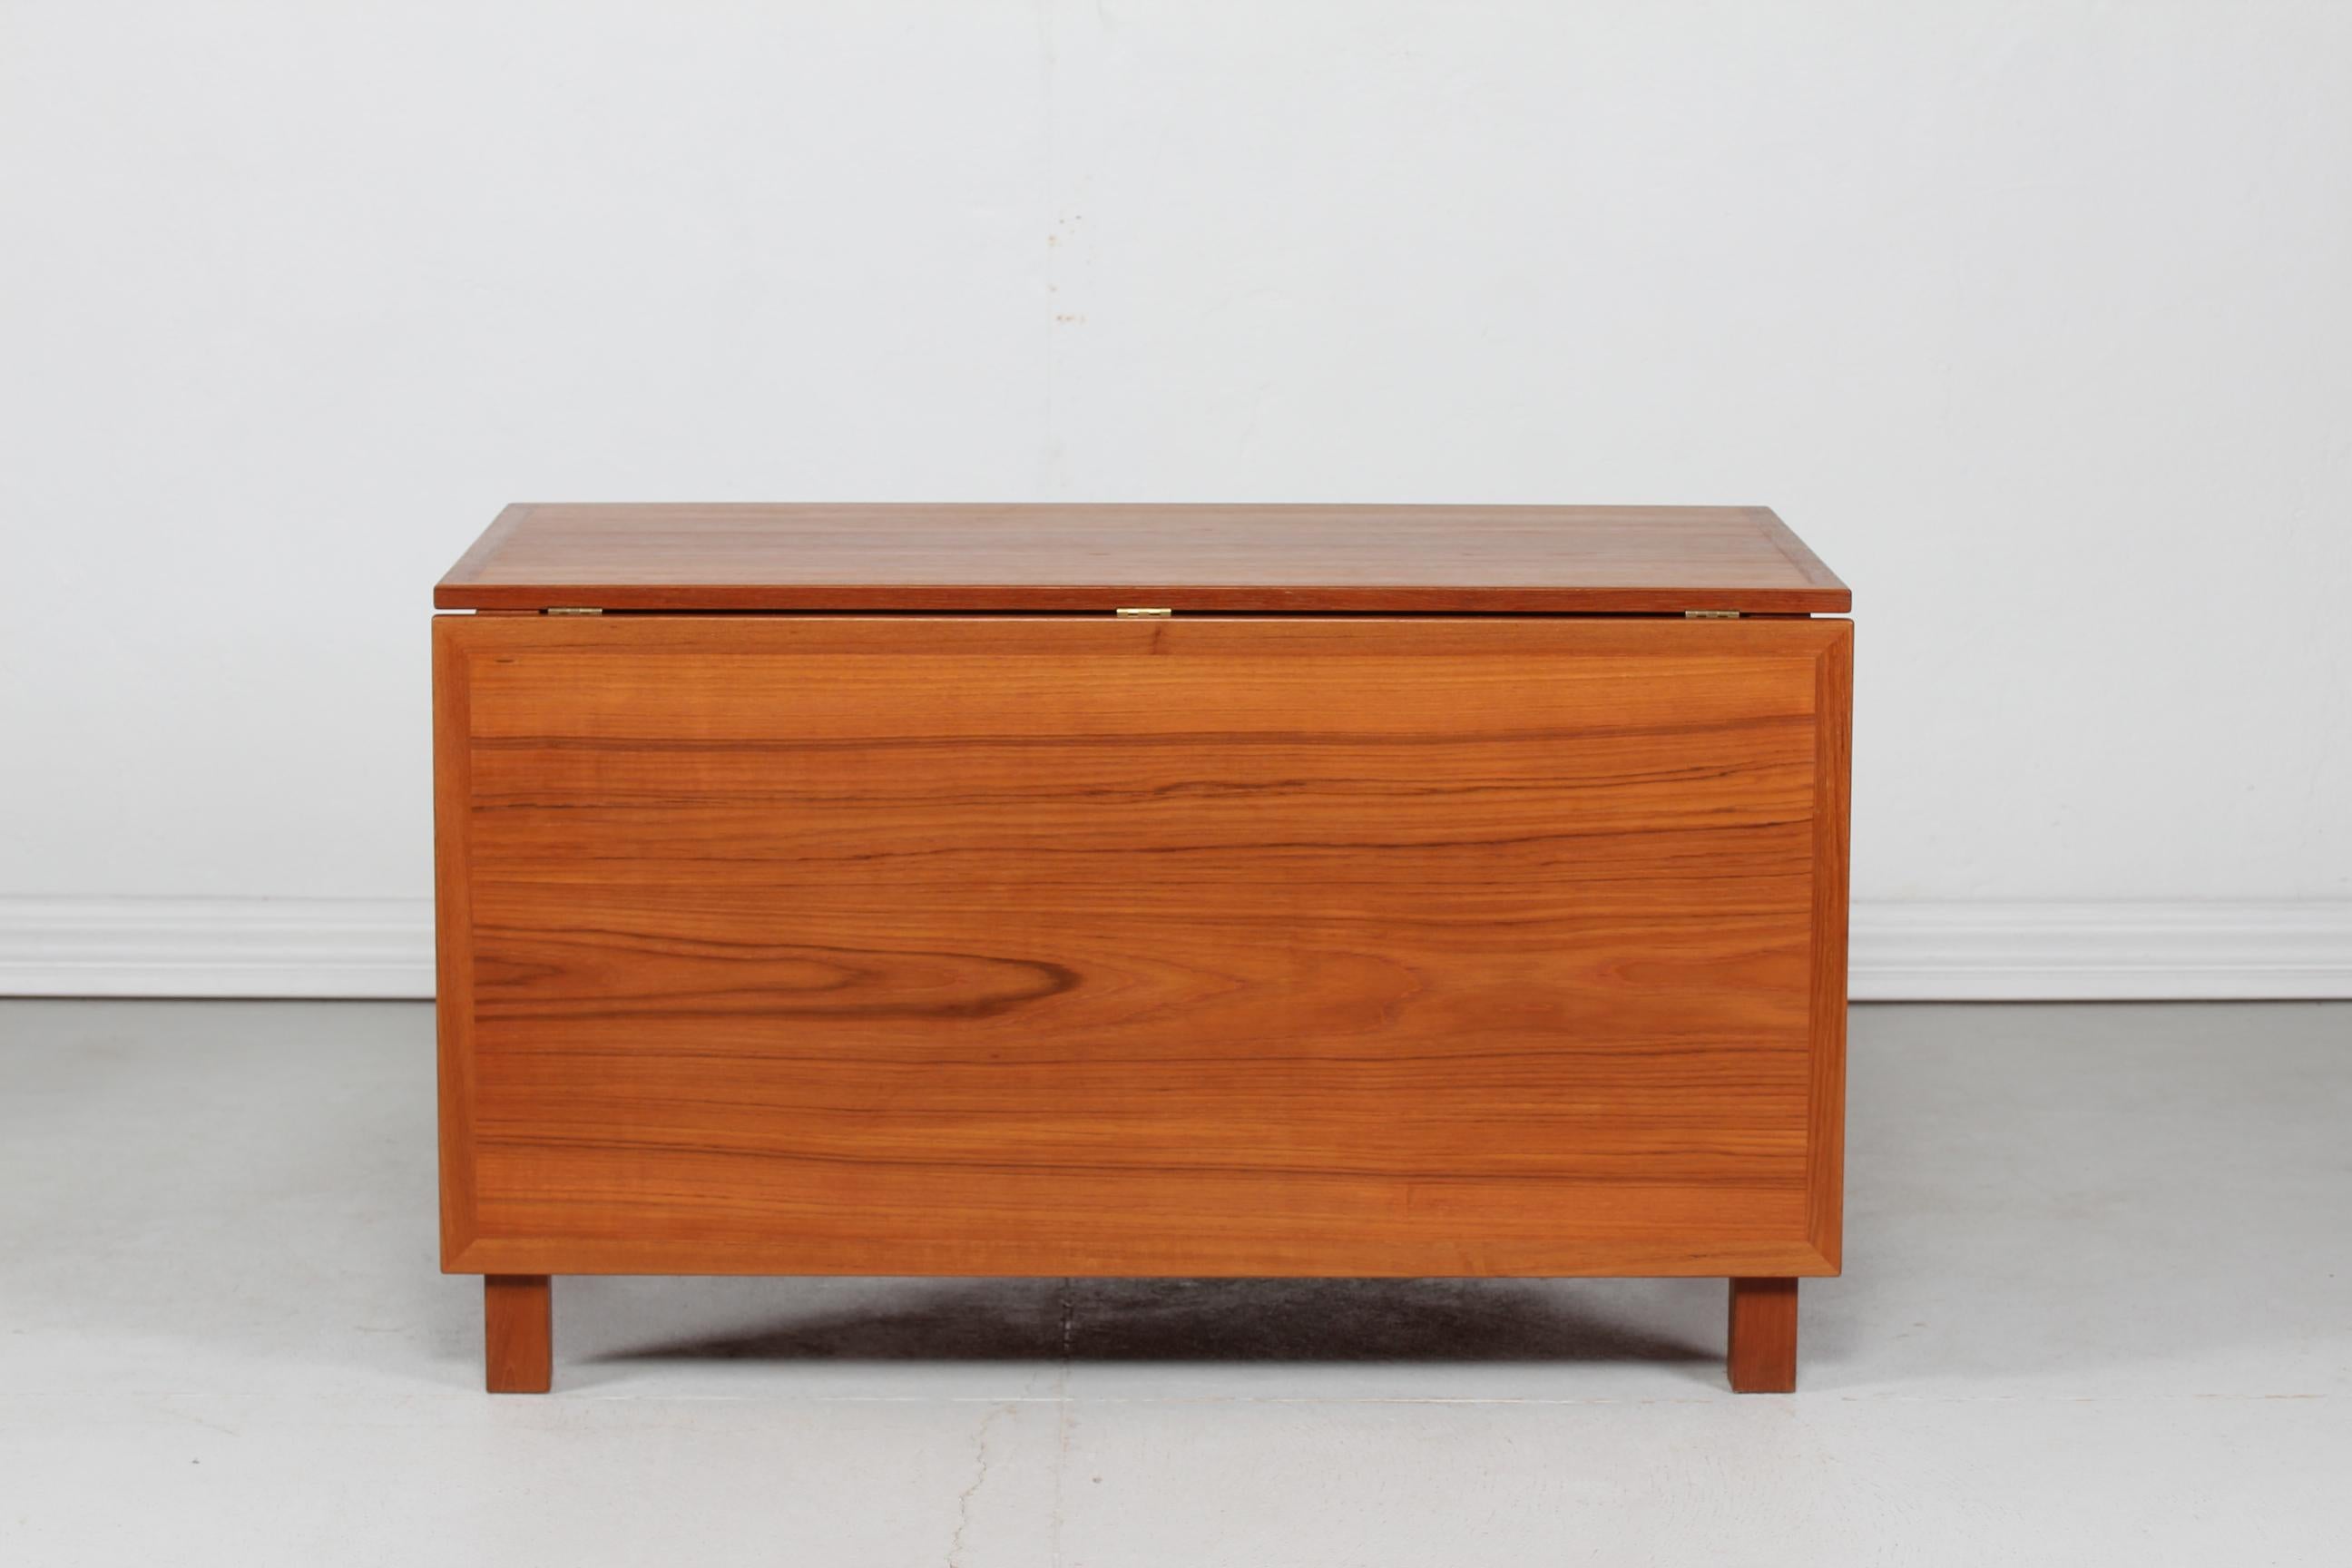 Danish Børge architect Mogensen (1914-1972)
Large vintage library table / drop-leaf gate leg table made of solid teak and teak veneer.

The table is manufactured by Karl Andersson & Sons, Sweden. And remains in a very good vintage condition with